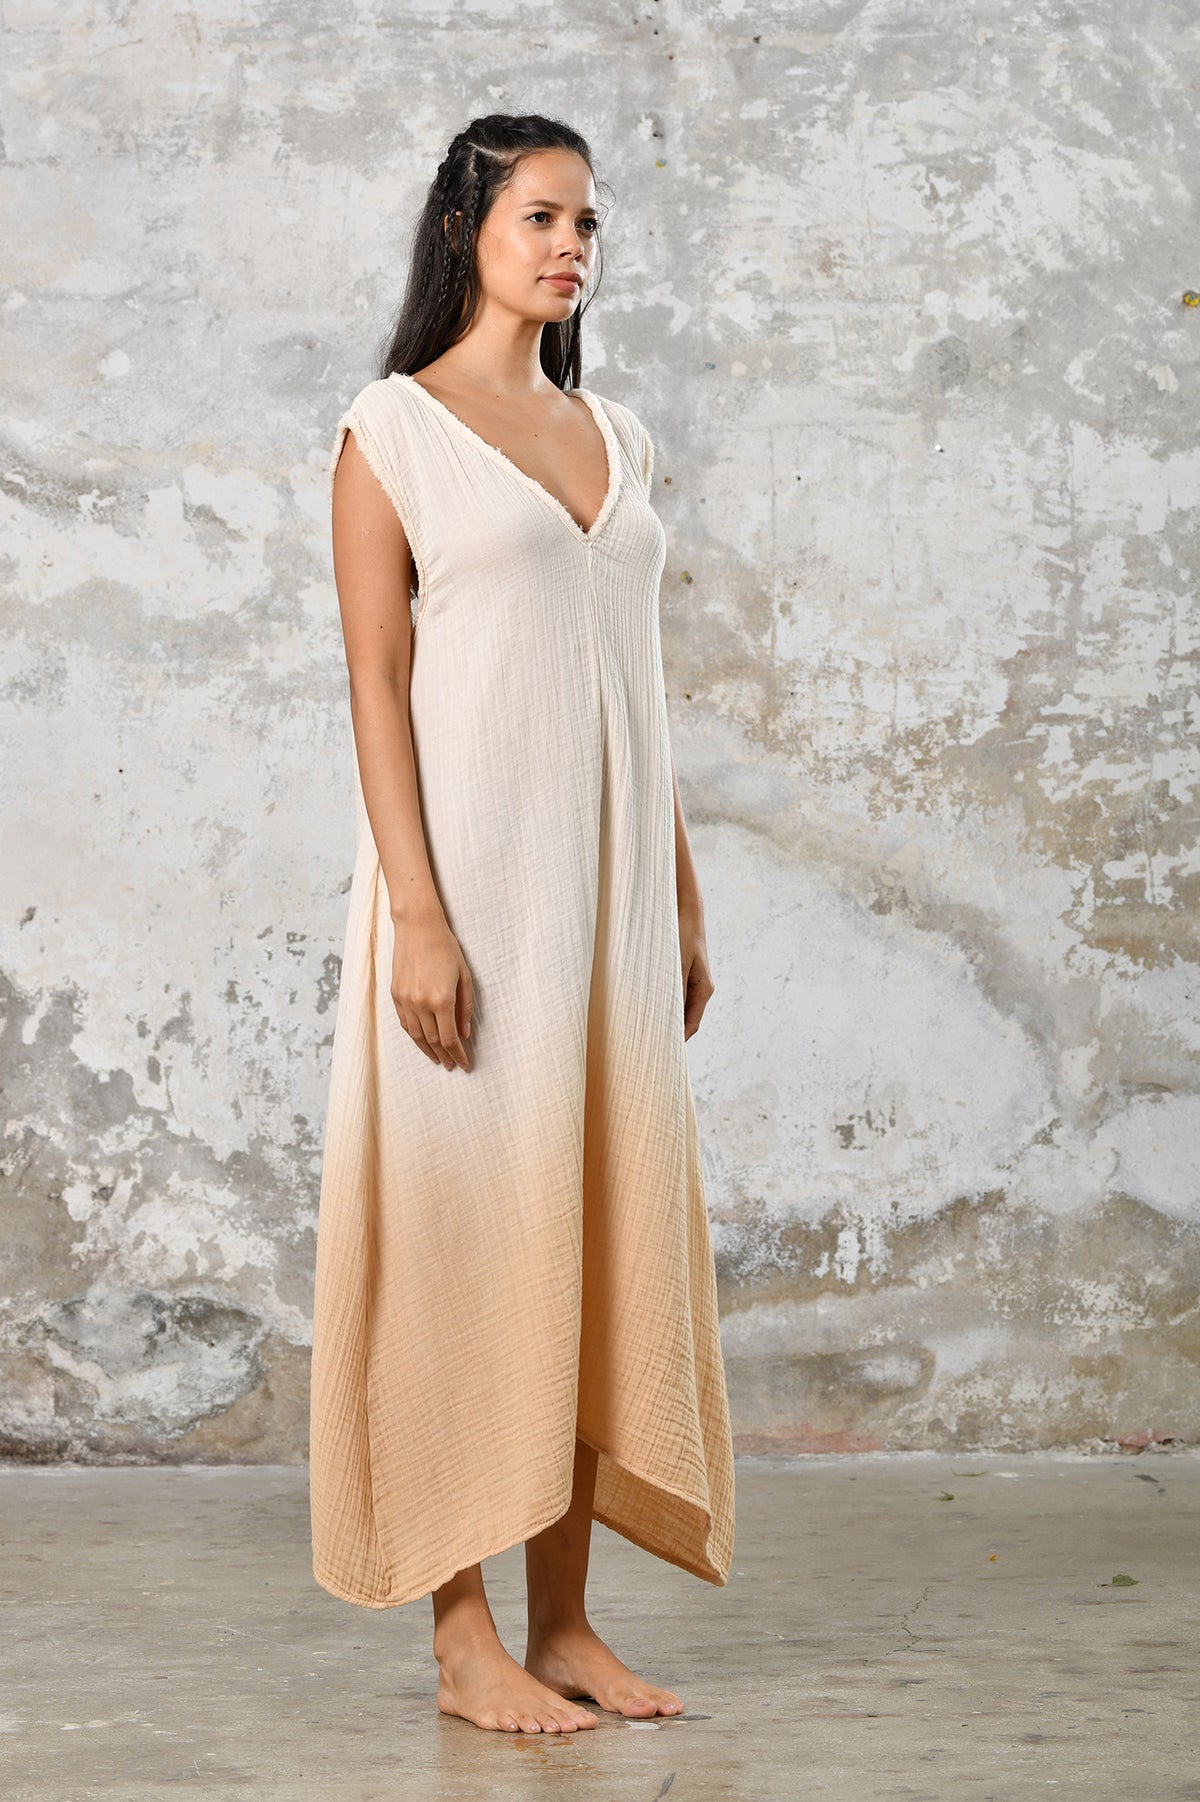 gift for her bohemian jumper. ombre colored boho style wide leg sexy jumper. Open back yoga jumper. Embrace your inner Greek goddess with this stunning asymmetrical jumpsuit. Christmas gift for her boho style